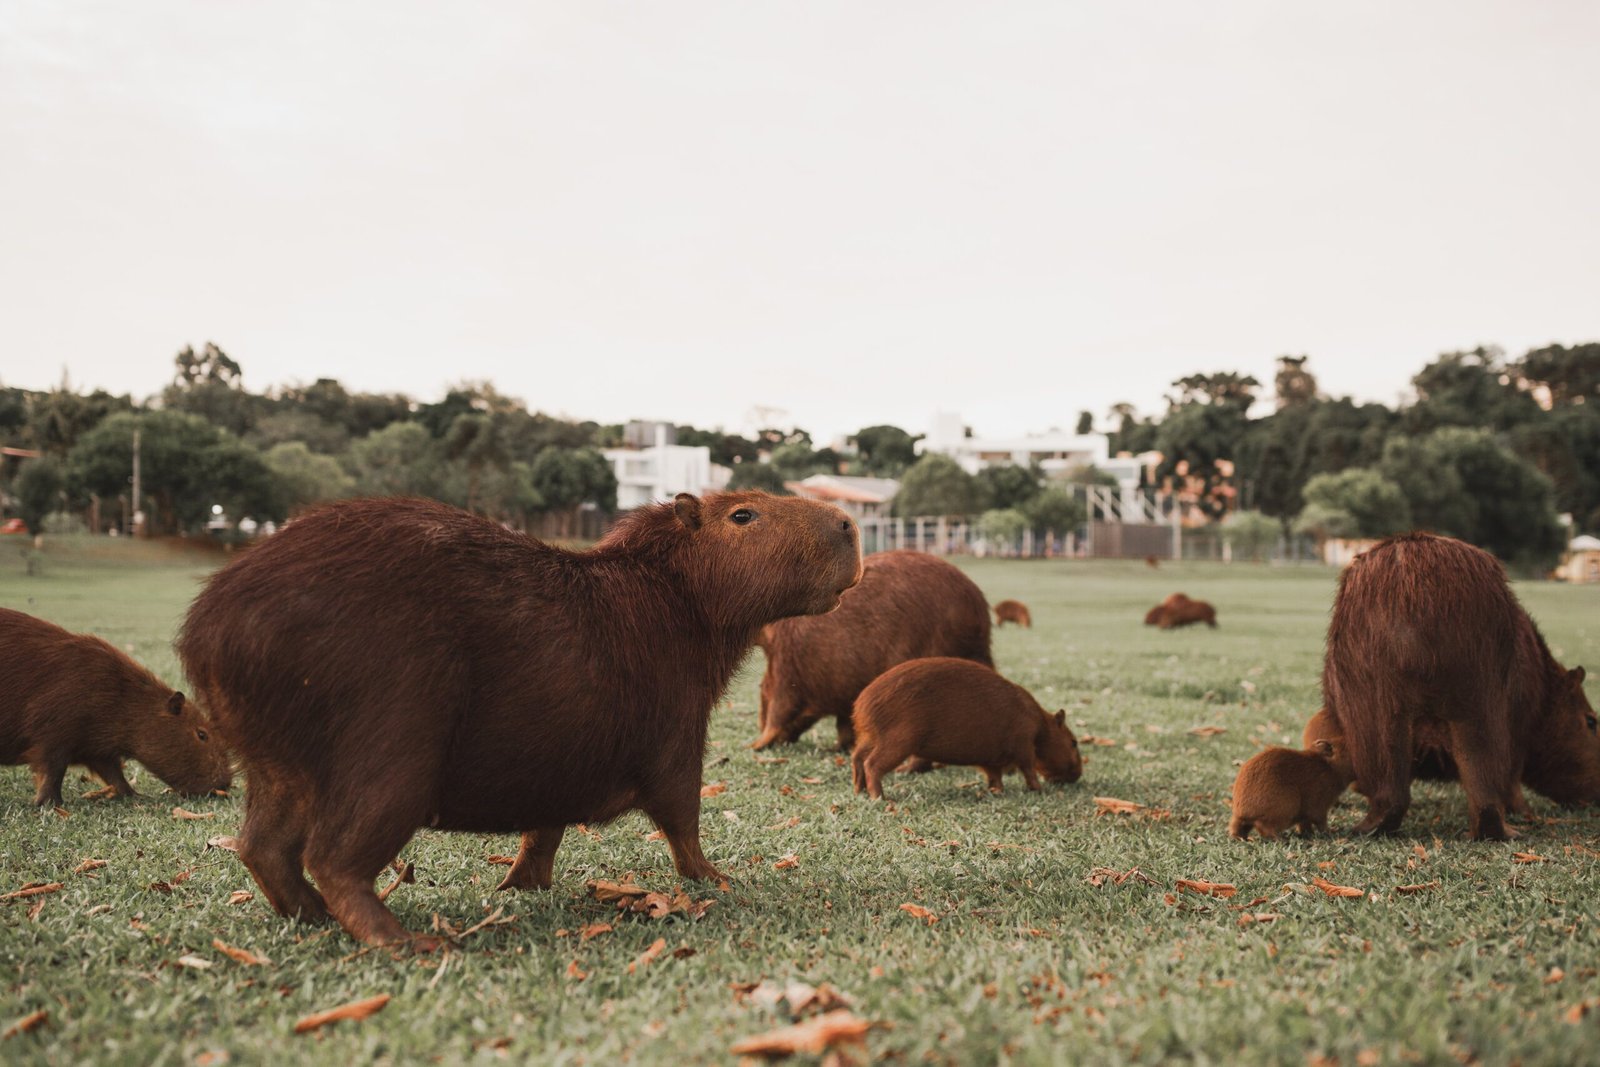 How much do capybaras cost?